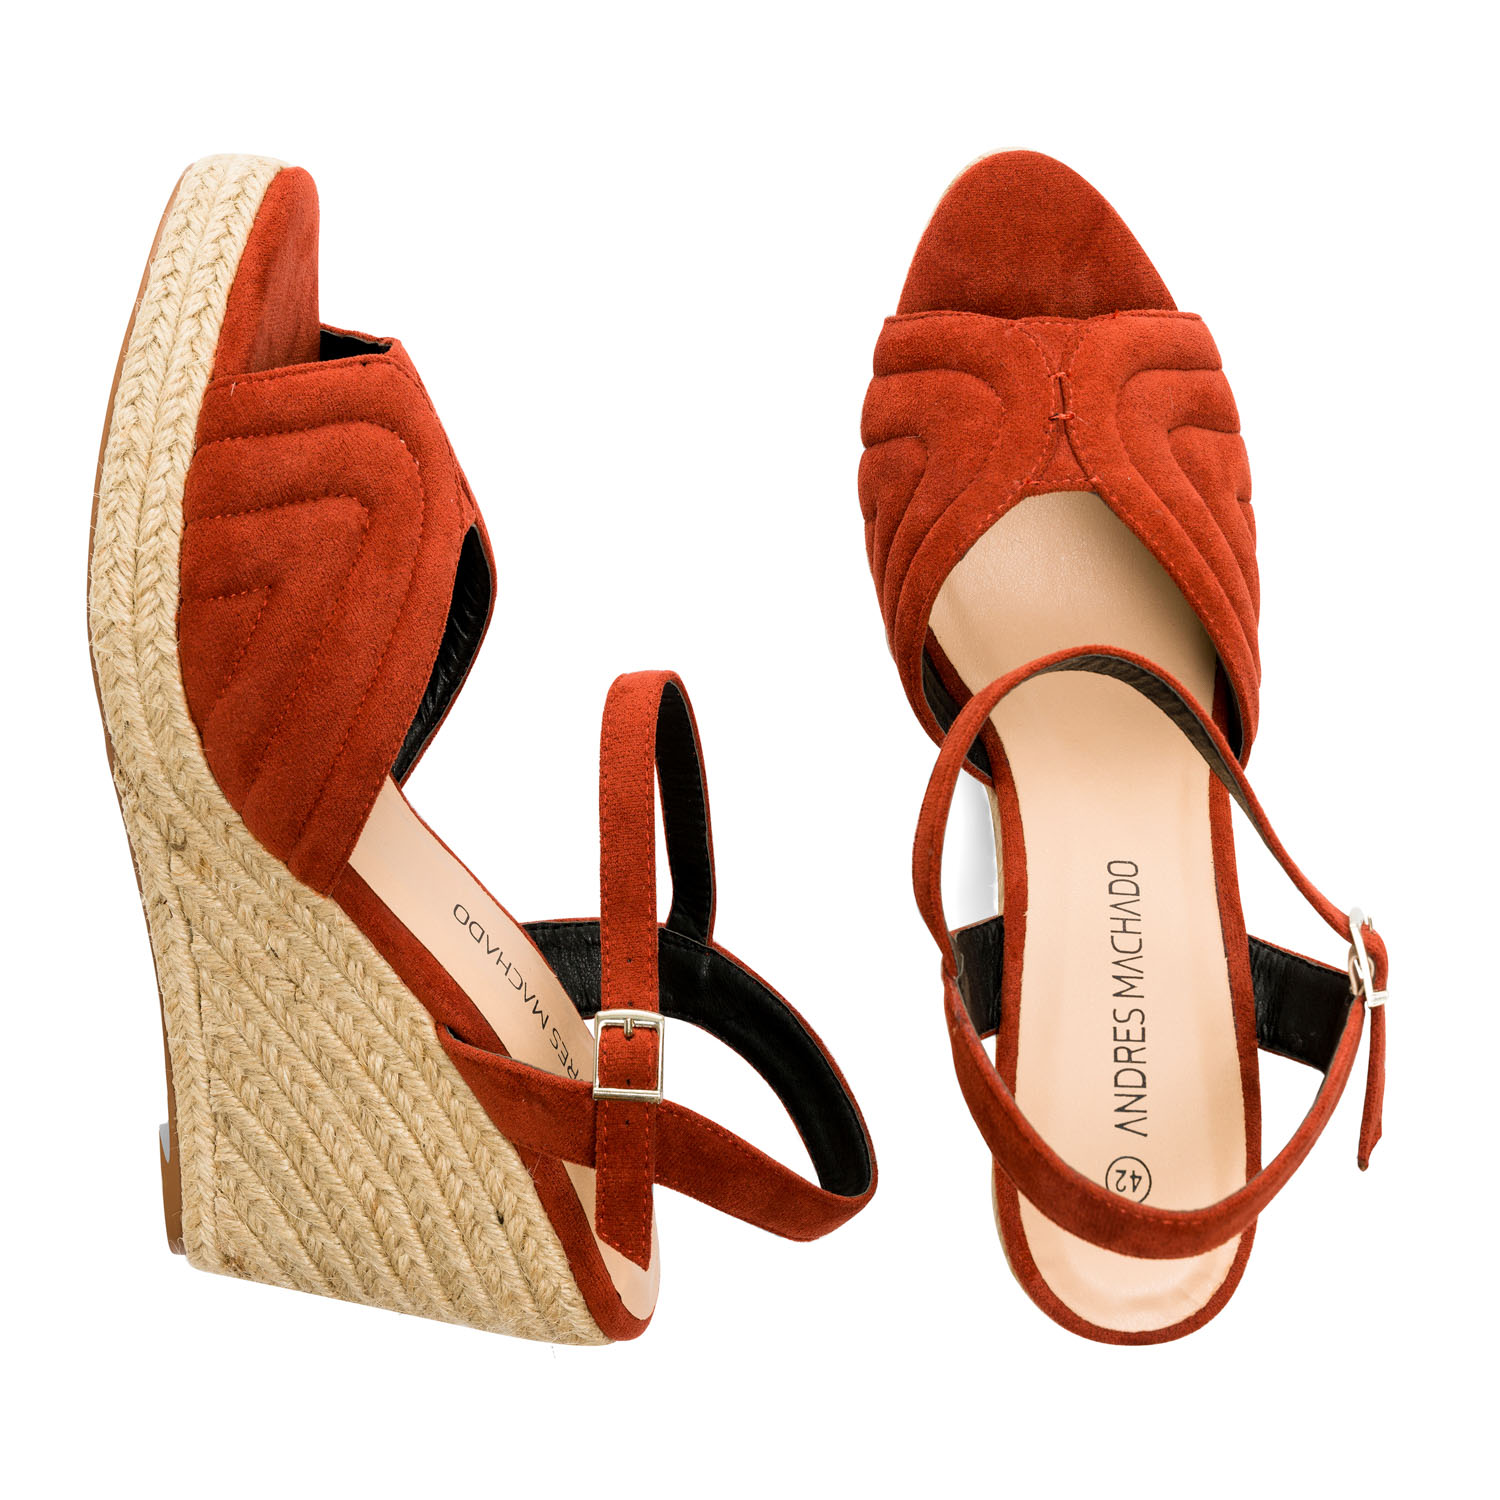 Brick-red faux suede espadrilles with jute wedge 